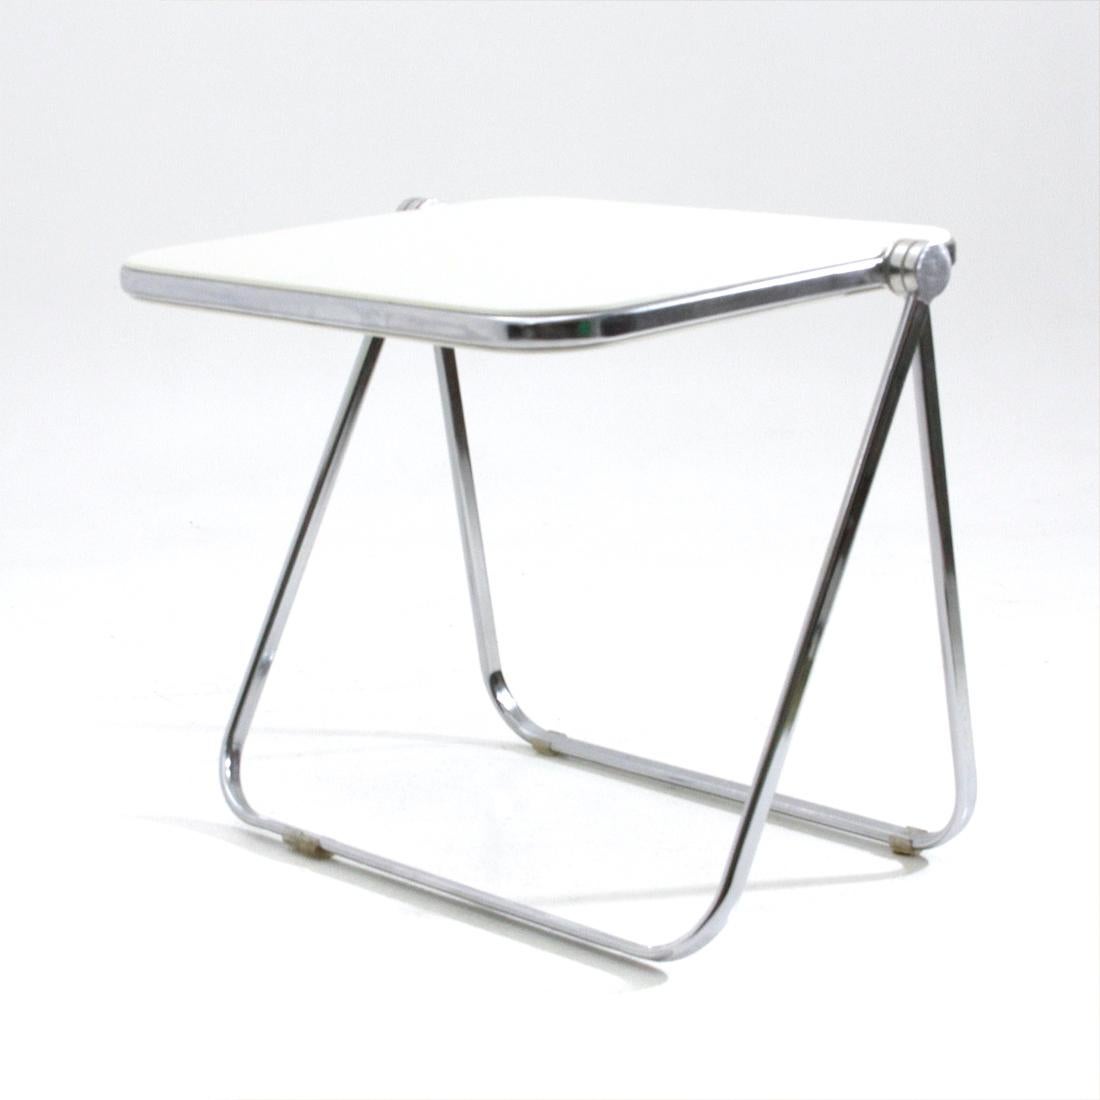 Desk produced in the 1960s by Anonima Castelli from Bologna based on a project by Giancarlo Piretti.
Structure in chromed tubular steel and joints in die-cast aluminum alloy.
Self-locking safety device.
Top in white rigid polyurethane.
Good